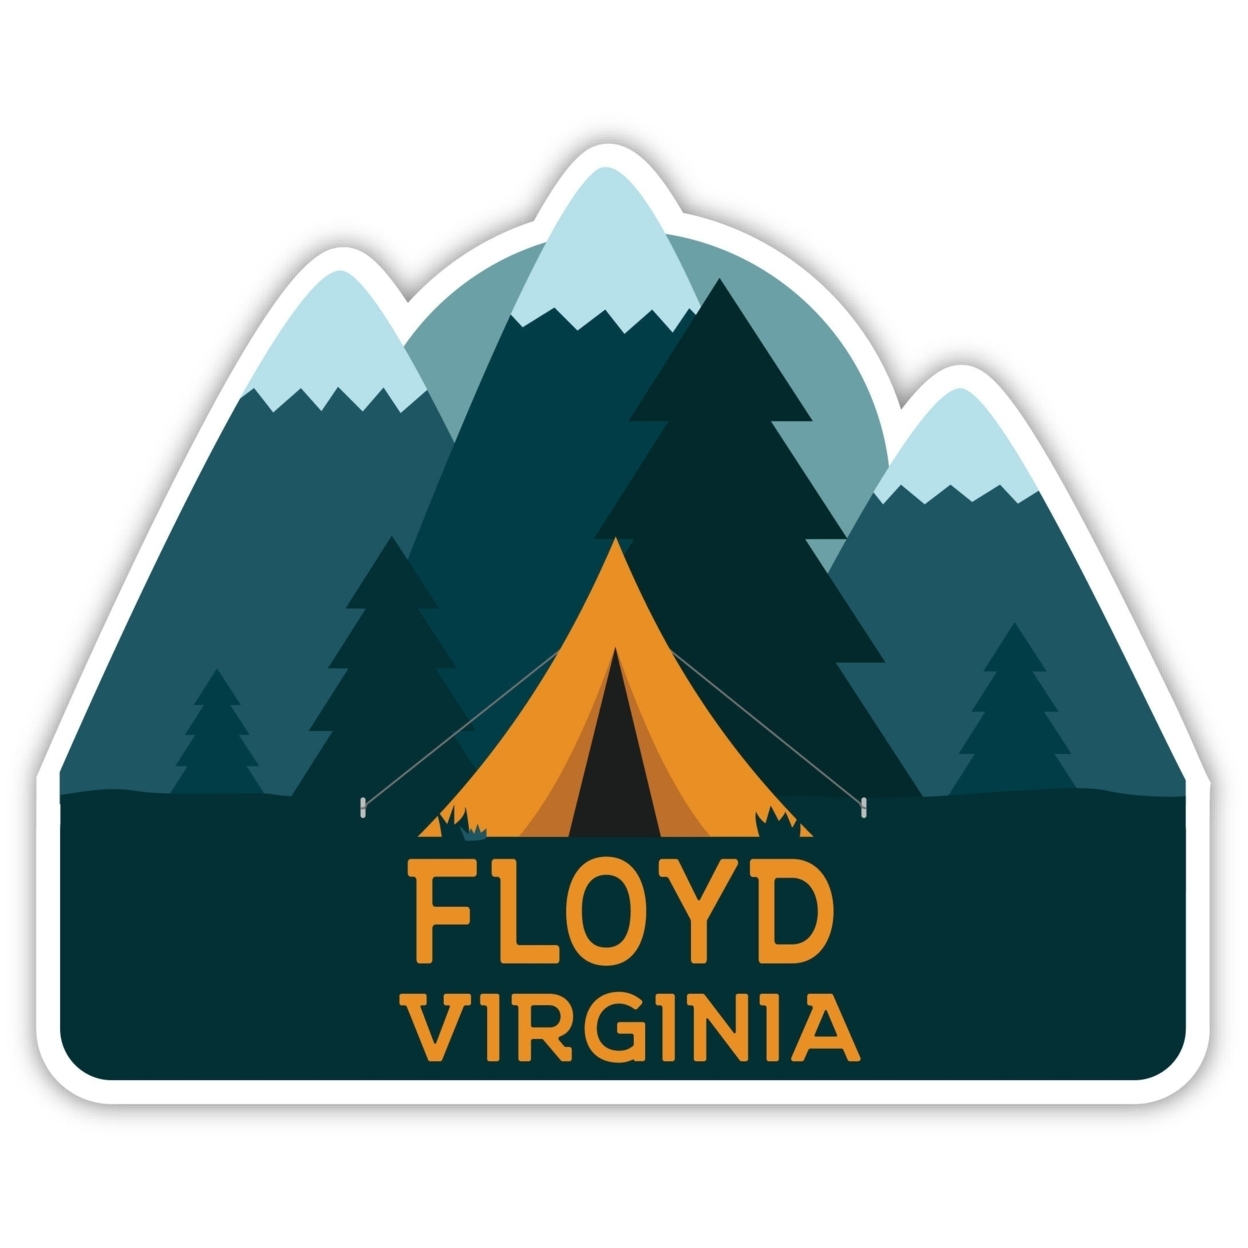 Floyd Virginia Souvenir Decorative Stickers (Choose Theme And Size) - 4-Pack, 10-Inch, Tent